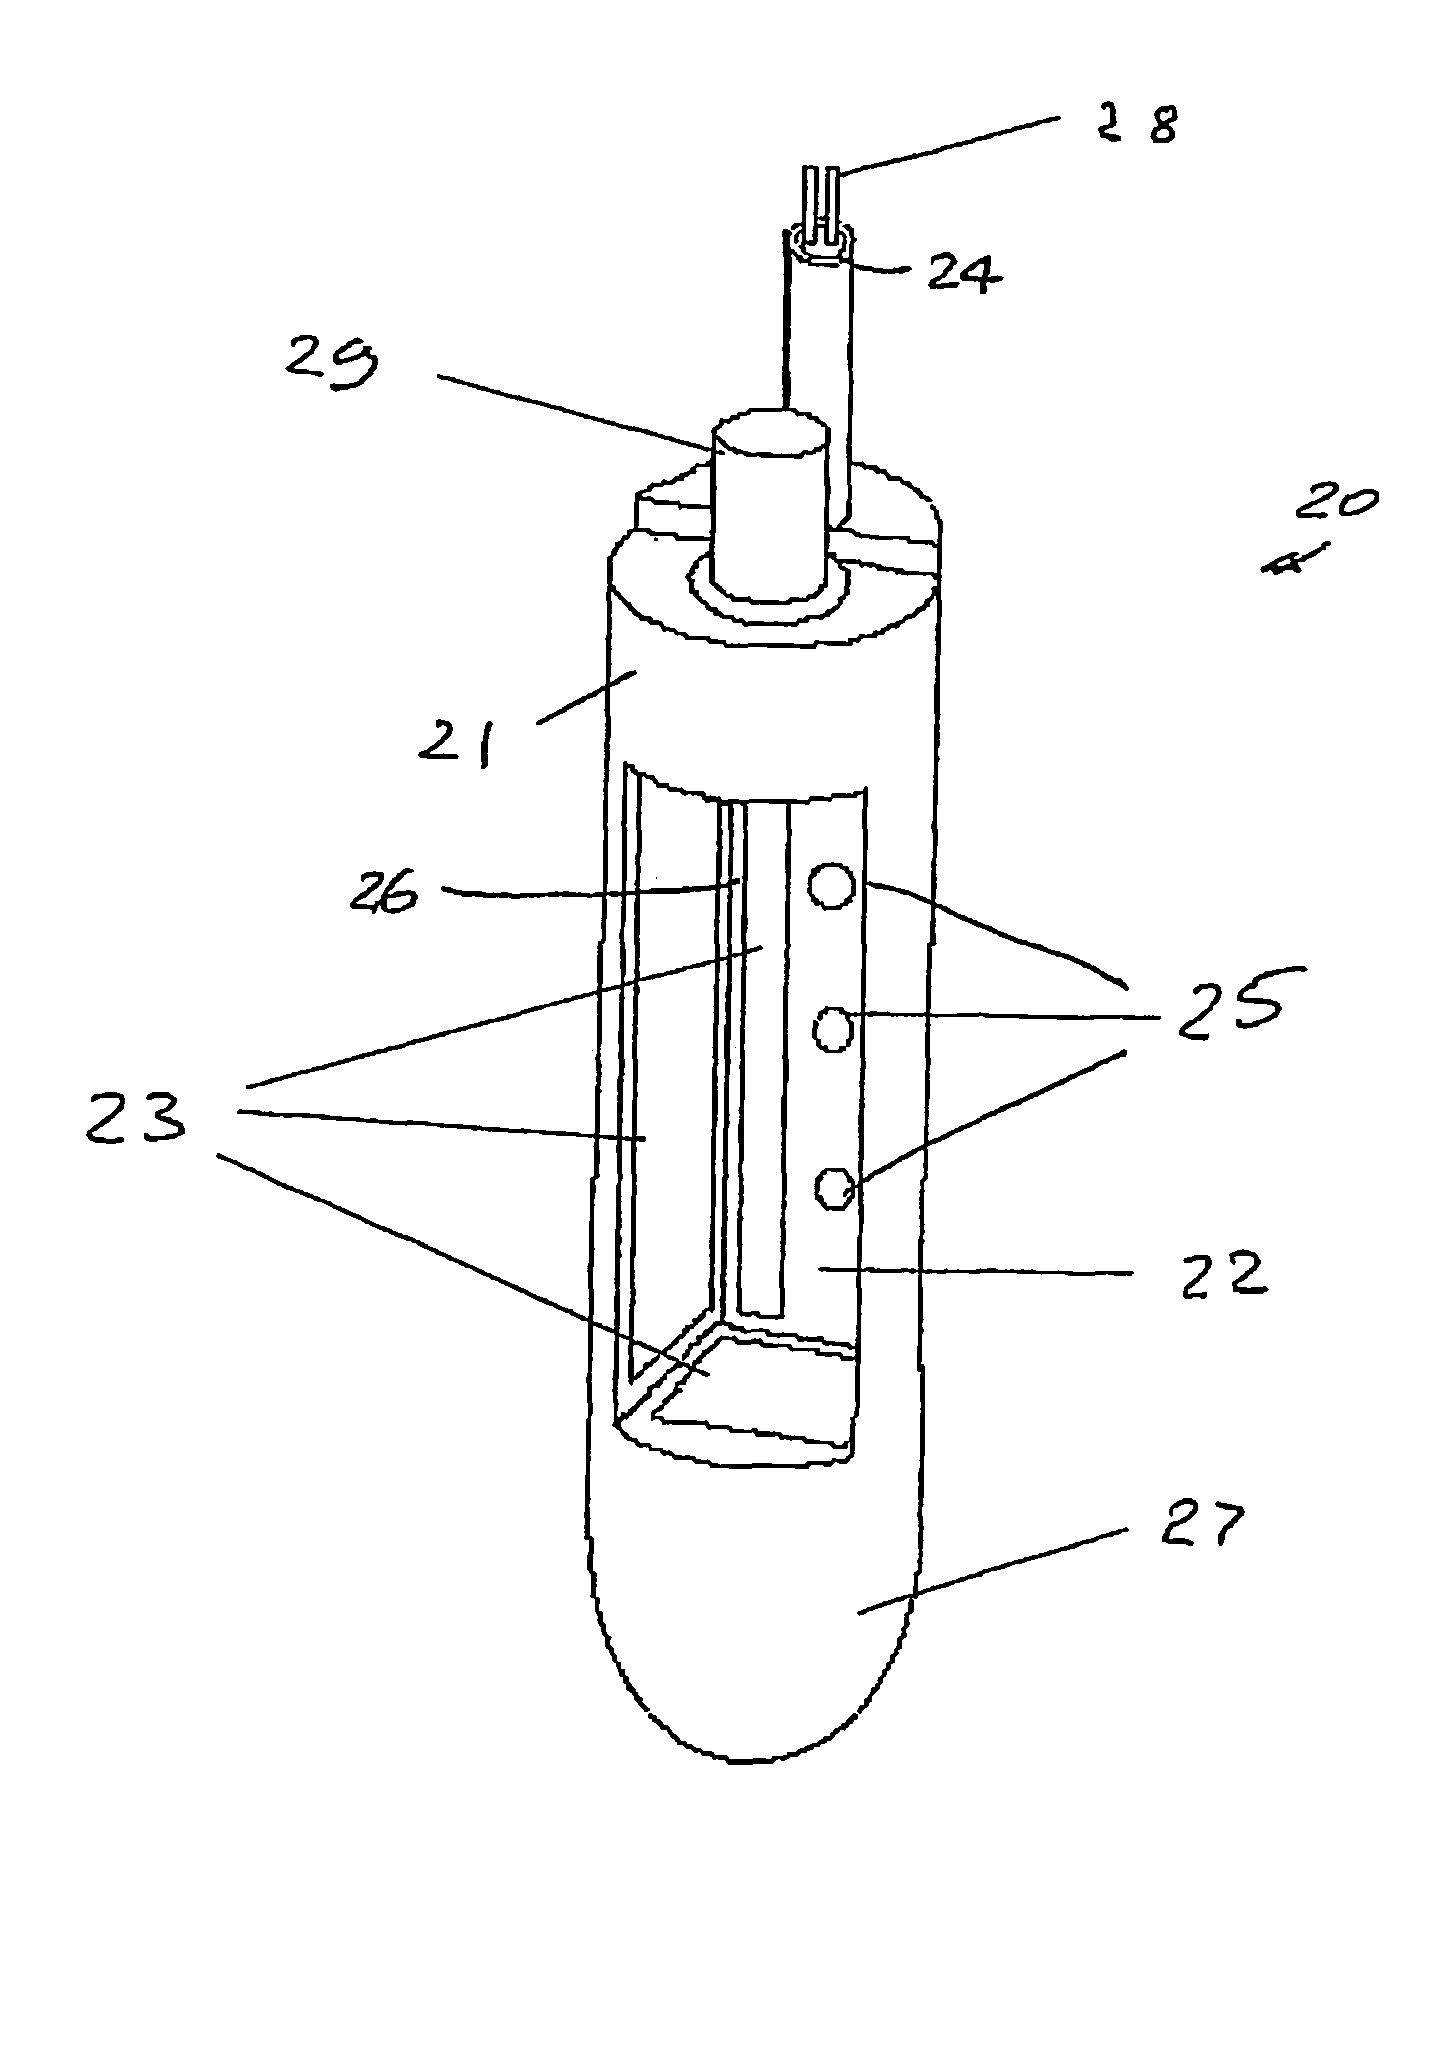 Apparatus for use in the prophylaxis or treatment of tissue